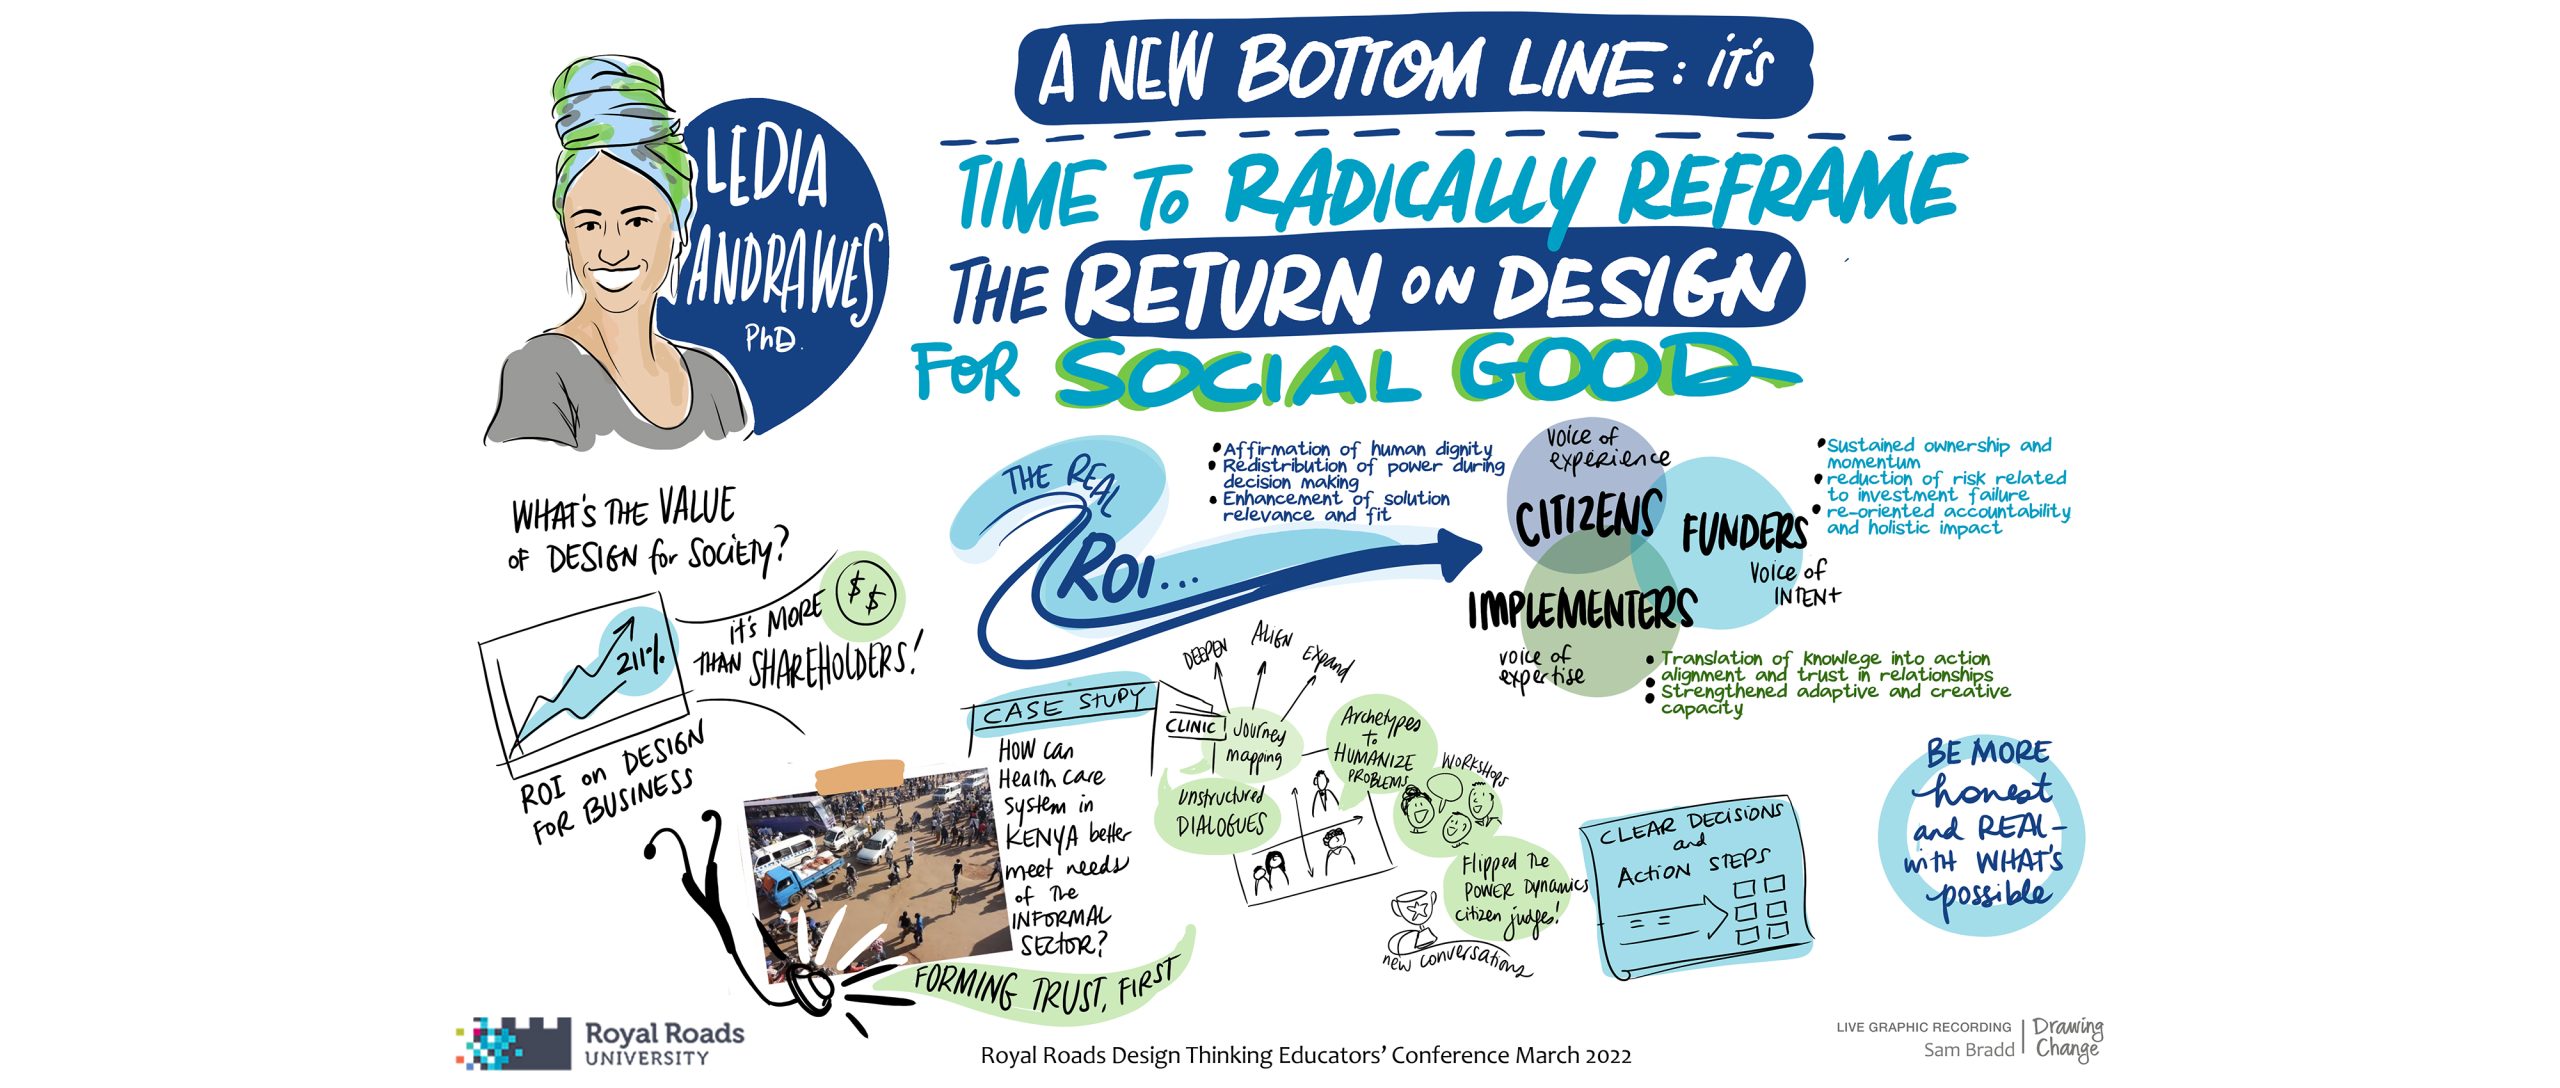 graphic recording keynote by Ledia Andrawes Keynote: A new bottom line: It’s time to radically reframe the ‘Return on Design’ for social good Is design a force for good? Sometimes! When practiced with care, design can help build trust, sustain ownership, reduce risk, increase equity, and challenge dominant power relationships. However, achieving such requires us to navigate a variety of ethical dilemmas, go beyond the conventional value frameworks of business, and embrace new terms toward a ’Return on Design’ for social good